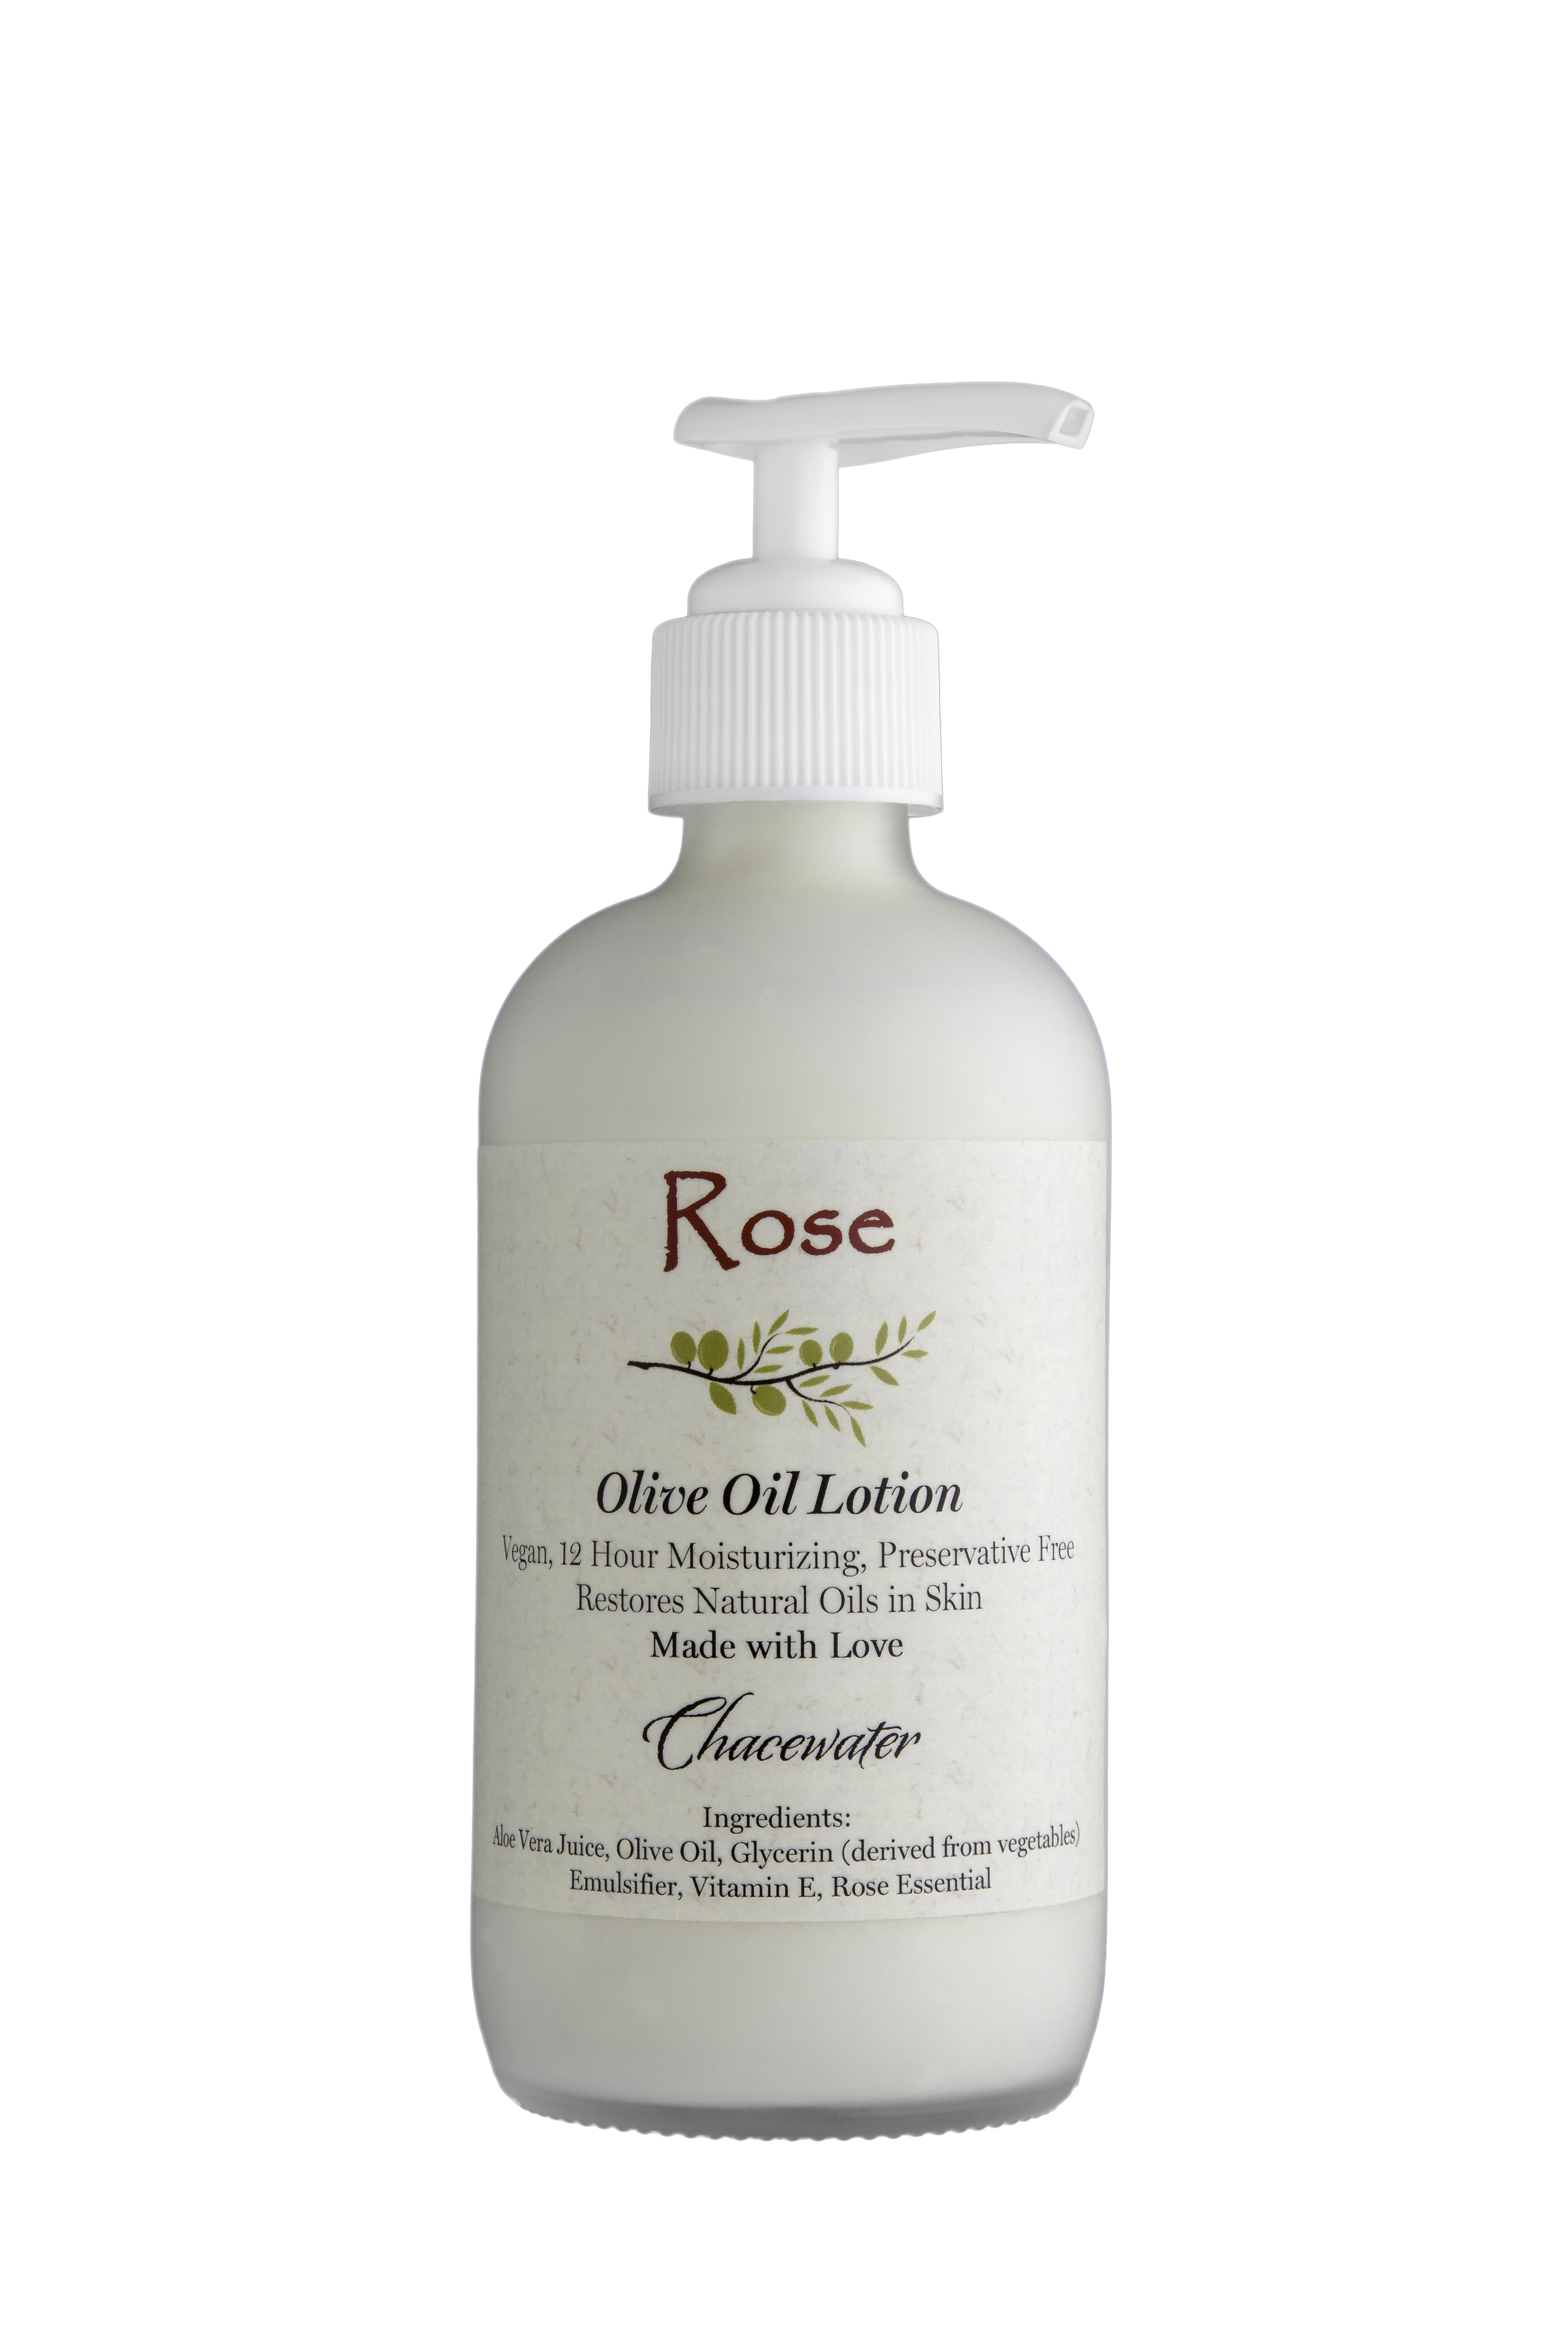 Product Image for Rose Olive Oil Lotion